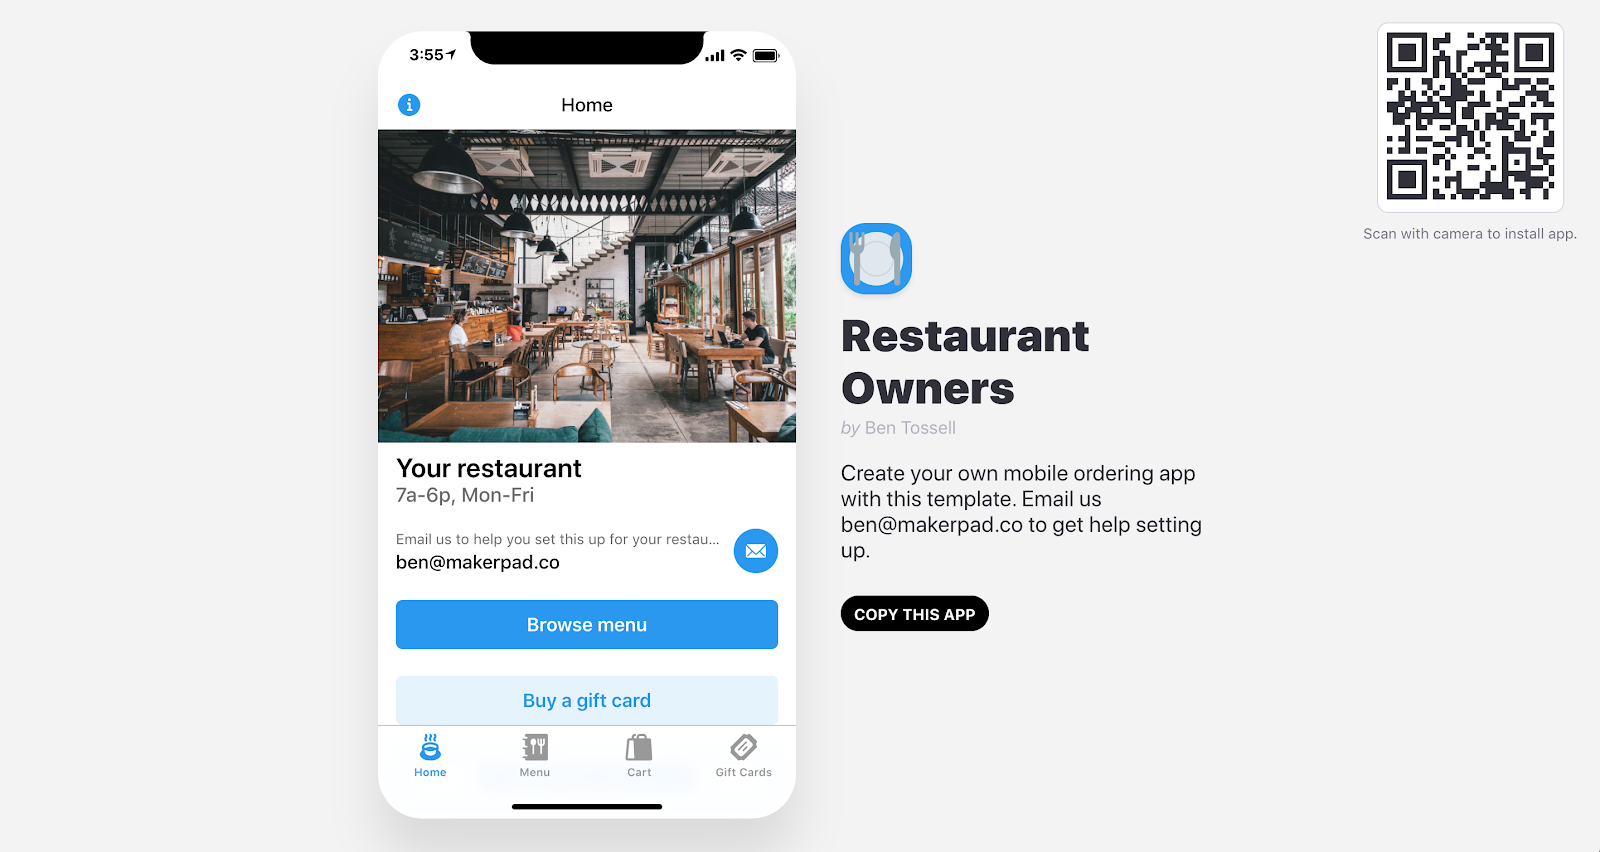 Restaurant owners app template, which uses a simple spreadsheet as the backend.